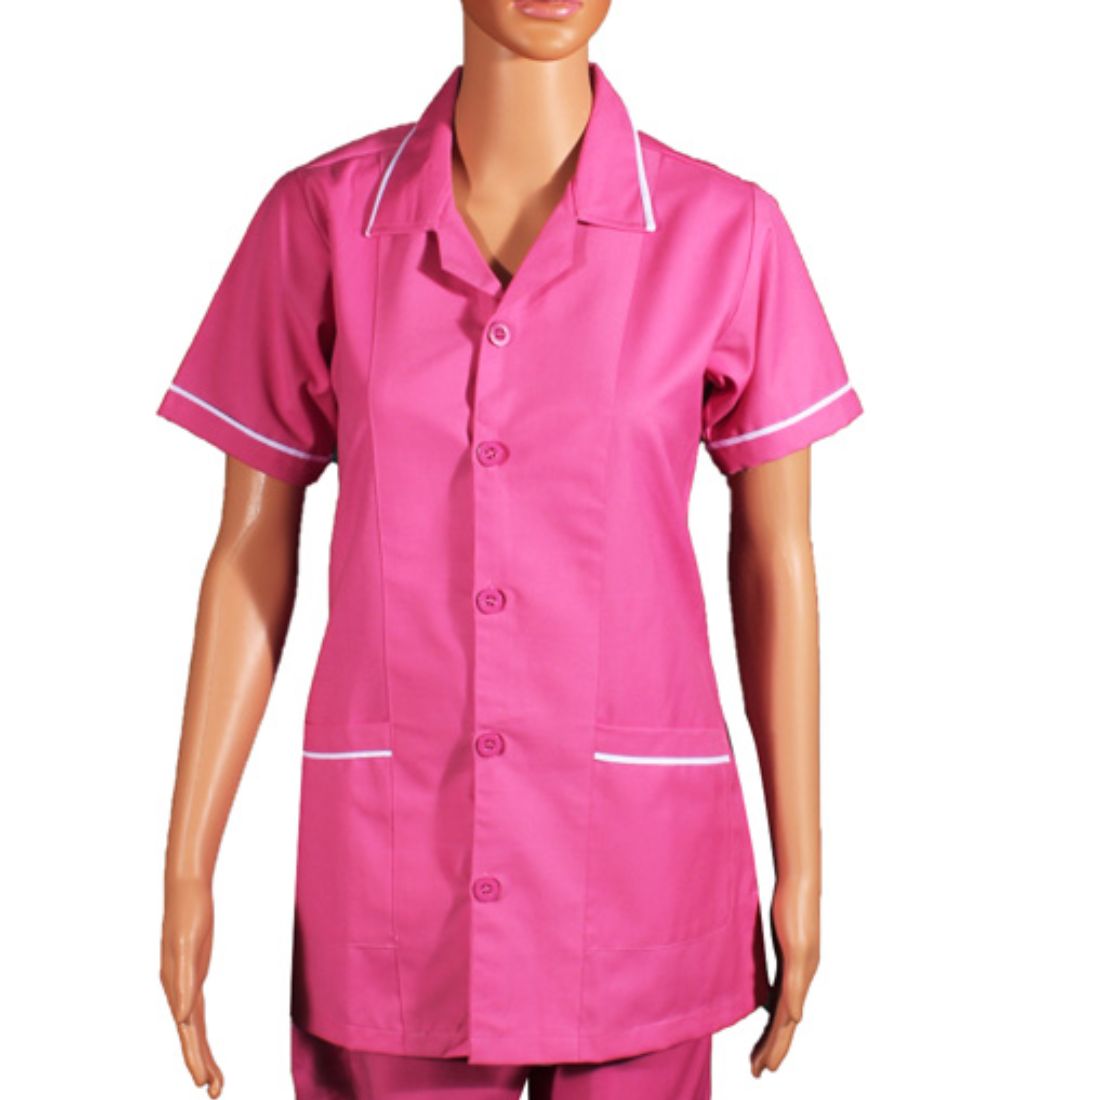 Buy Nurse uniforms help in the formation of professional identity in healthcare.